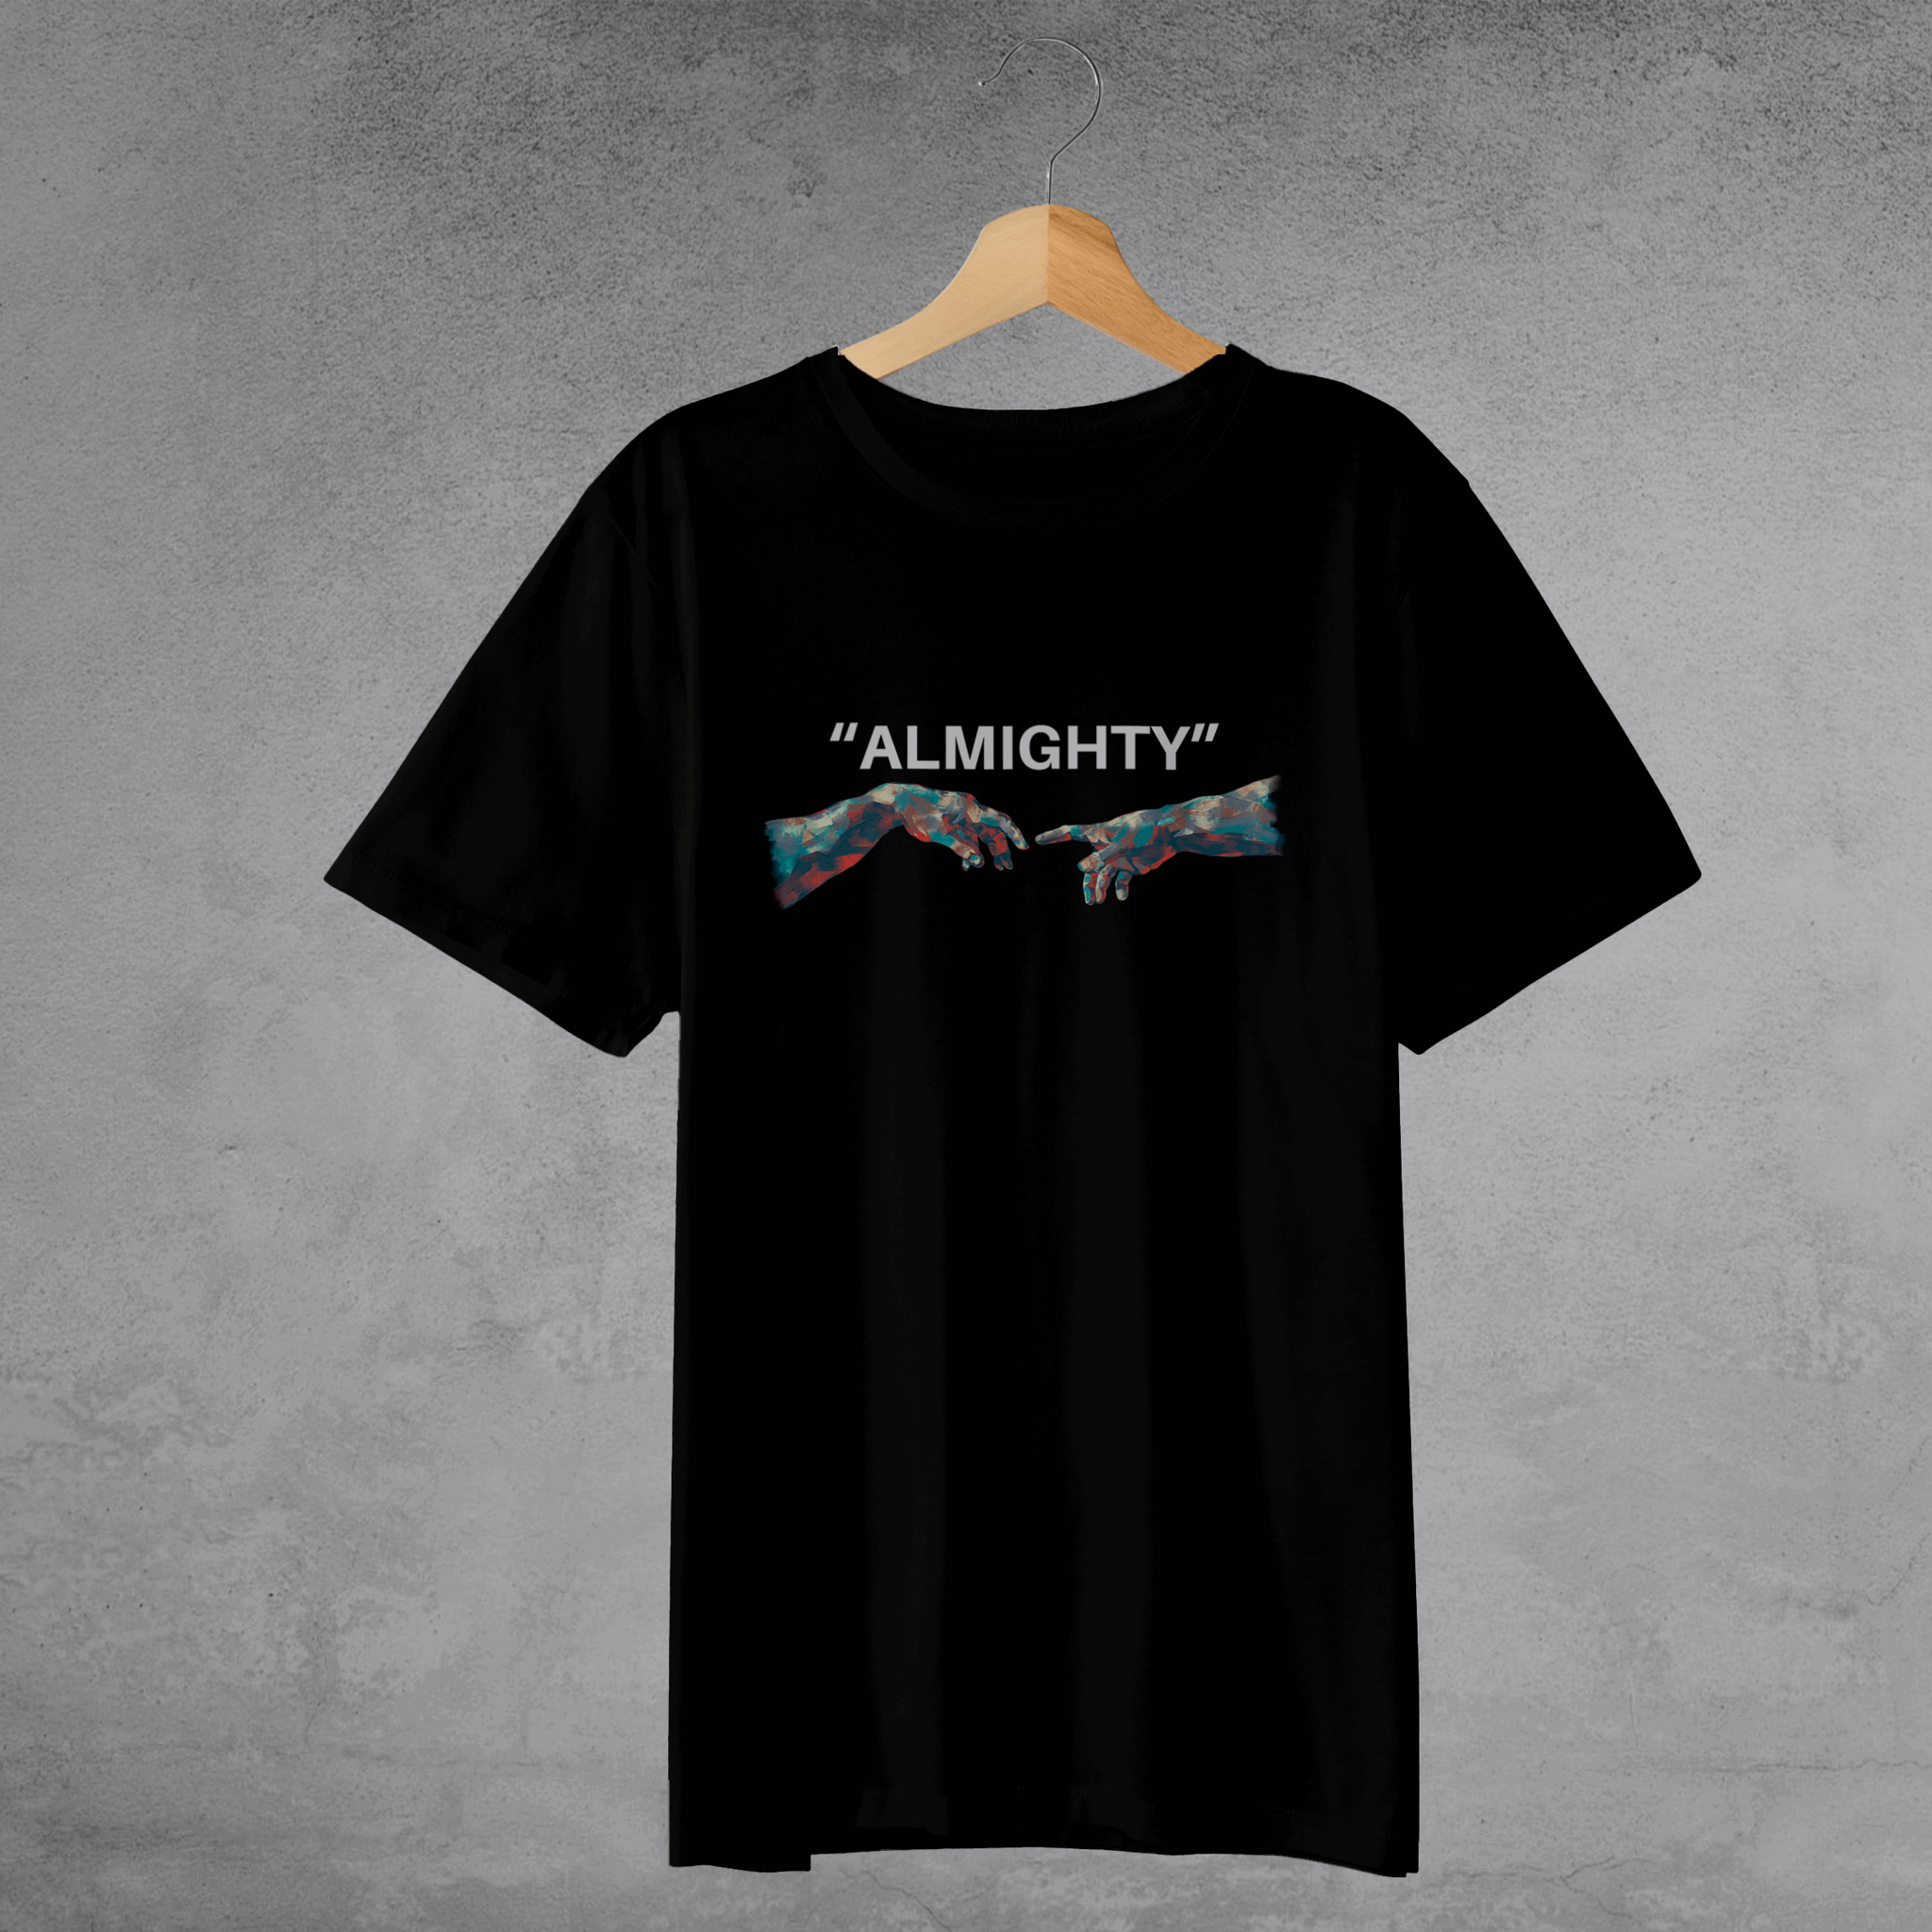 Almighty Ethereal Edition - T-Shirt